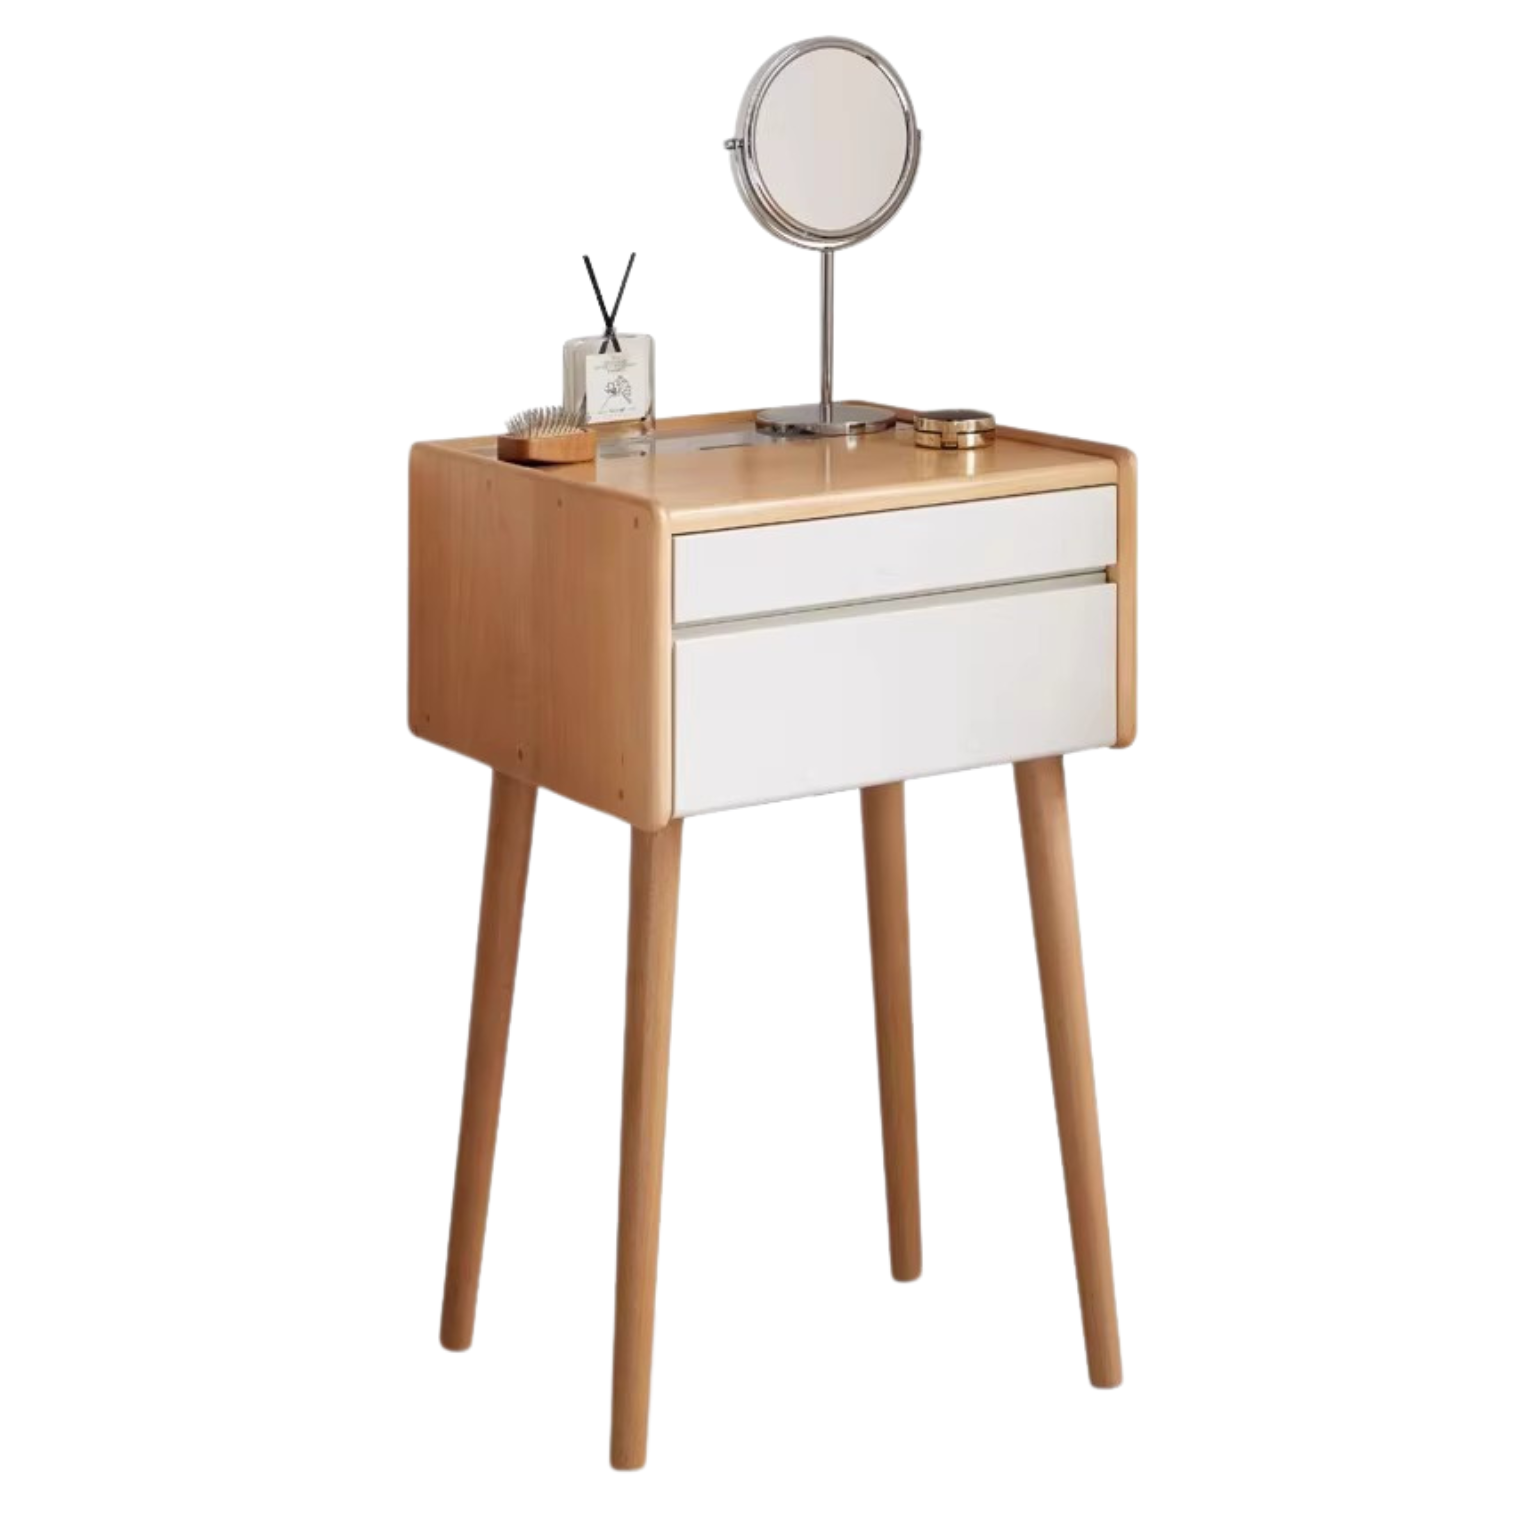 Beech Solid Wood Dressing Table Small Bedside Table: